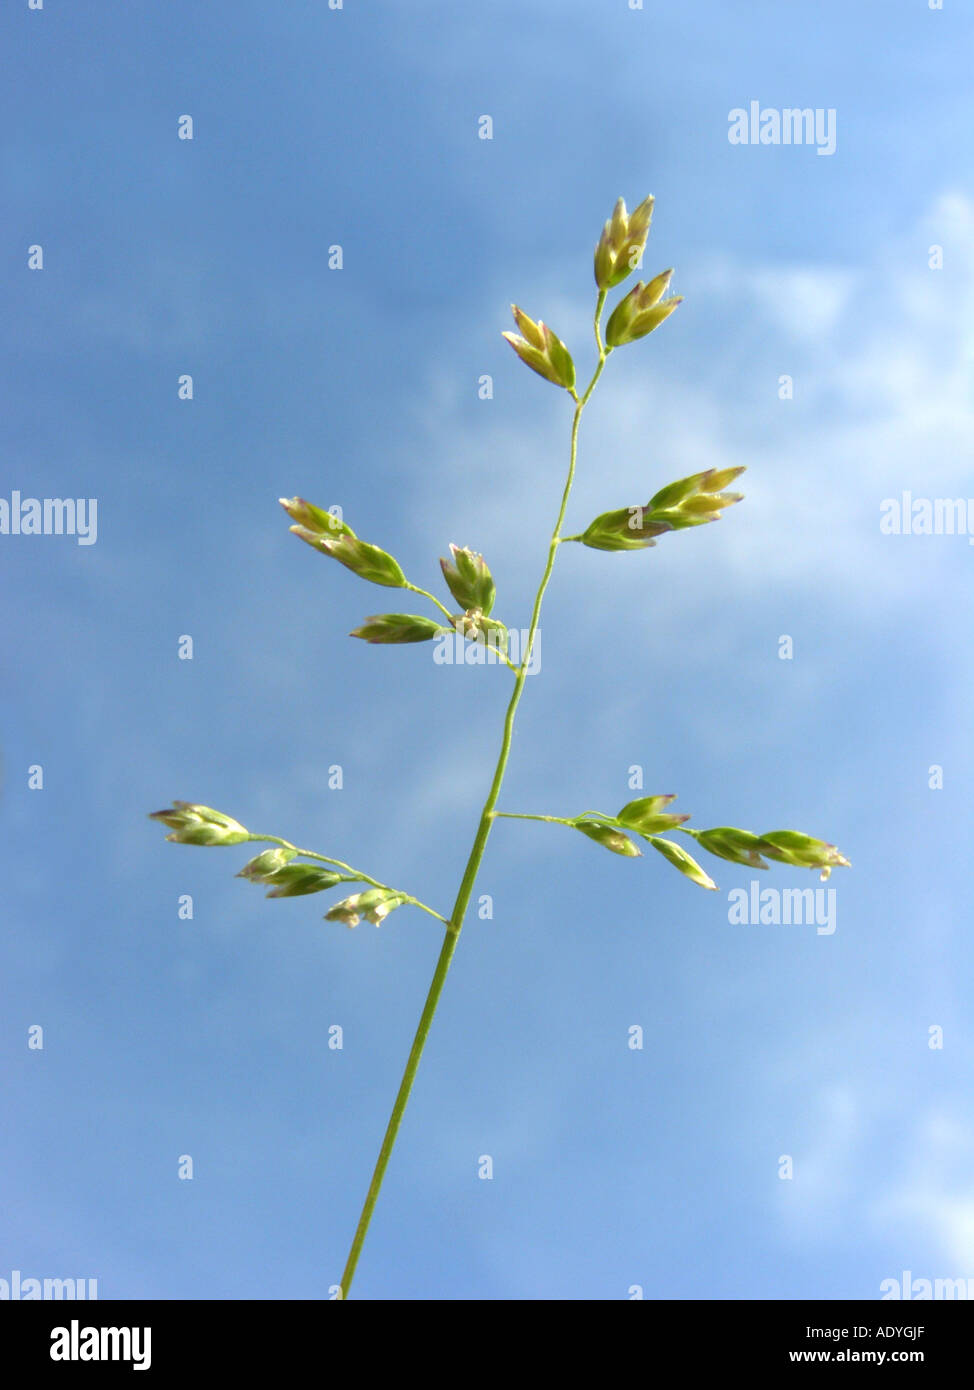 annual blue-grass, annual meadow-grass, low spear grass (Poa annua), inflorescence against blue sky Stock Photo